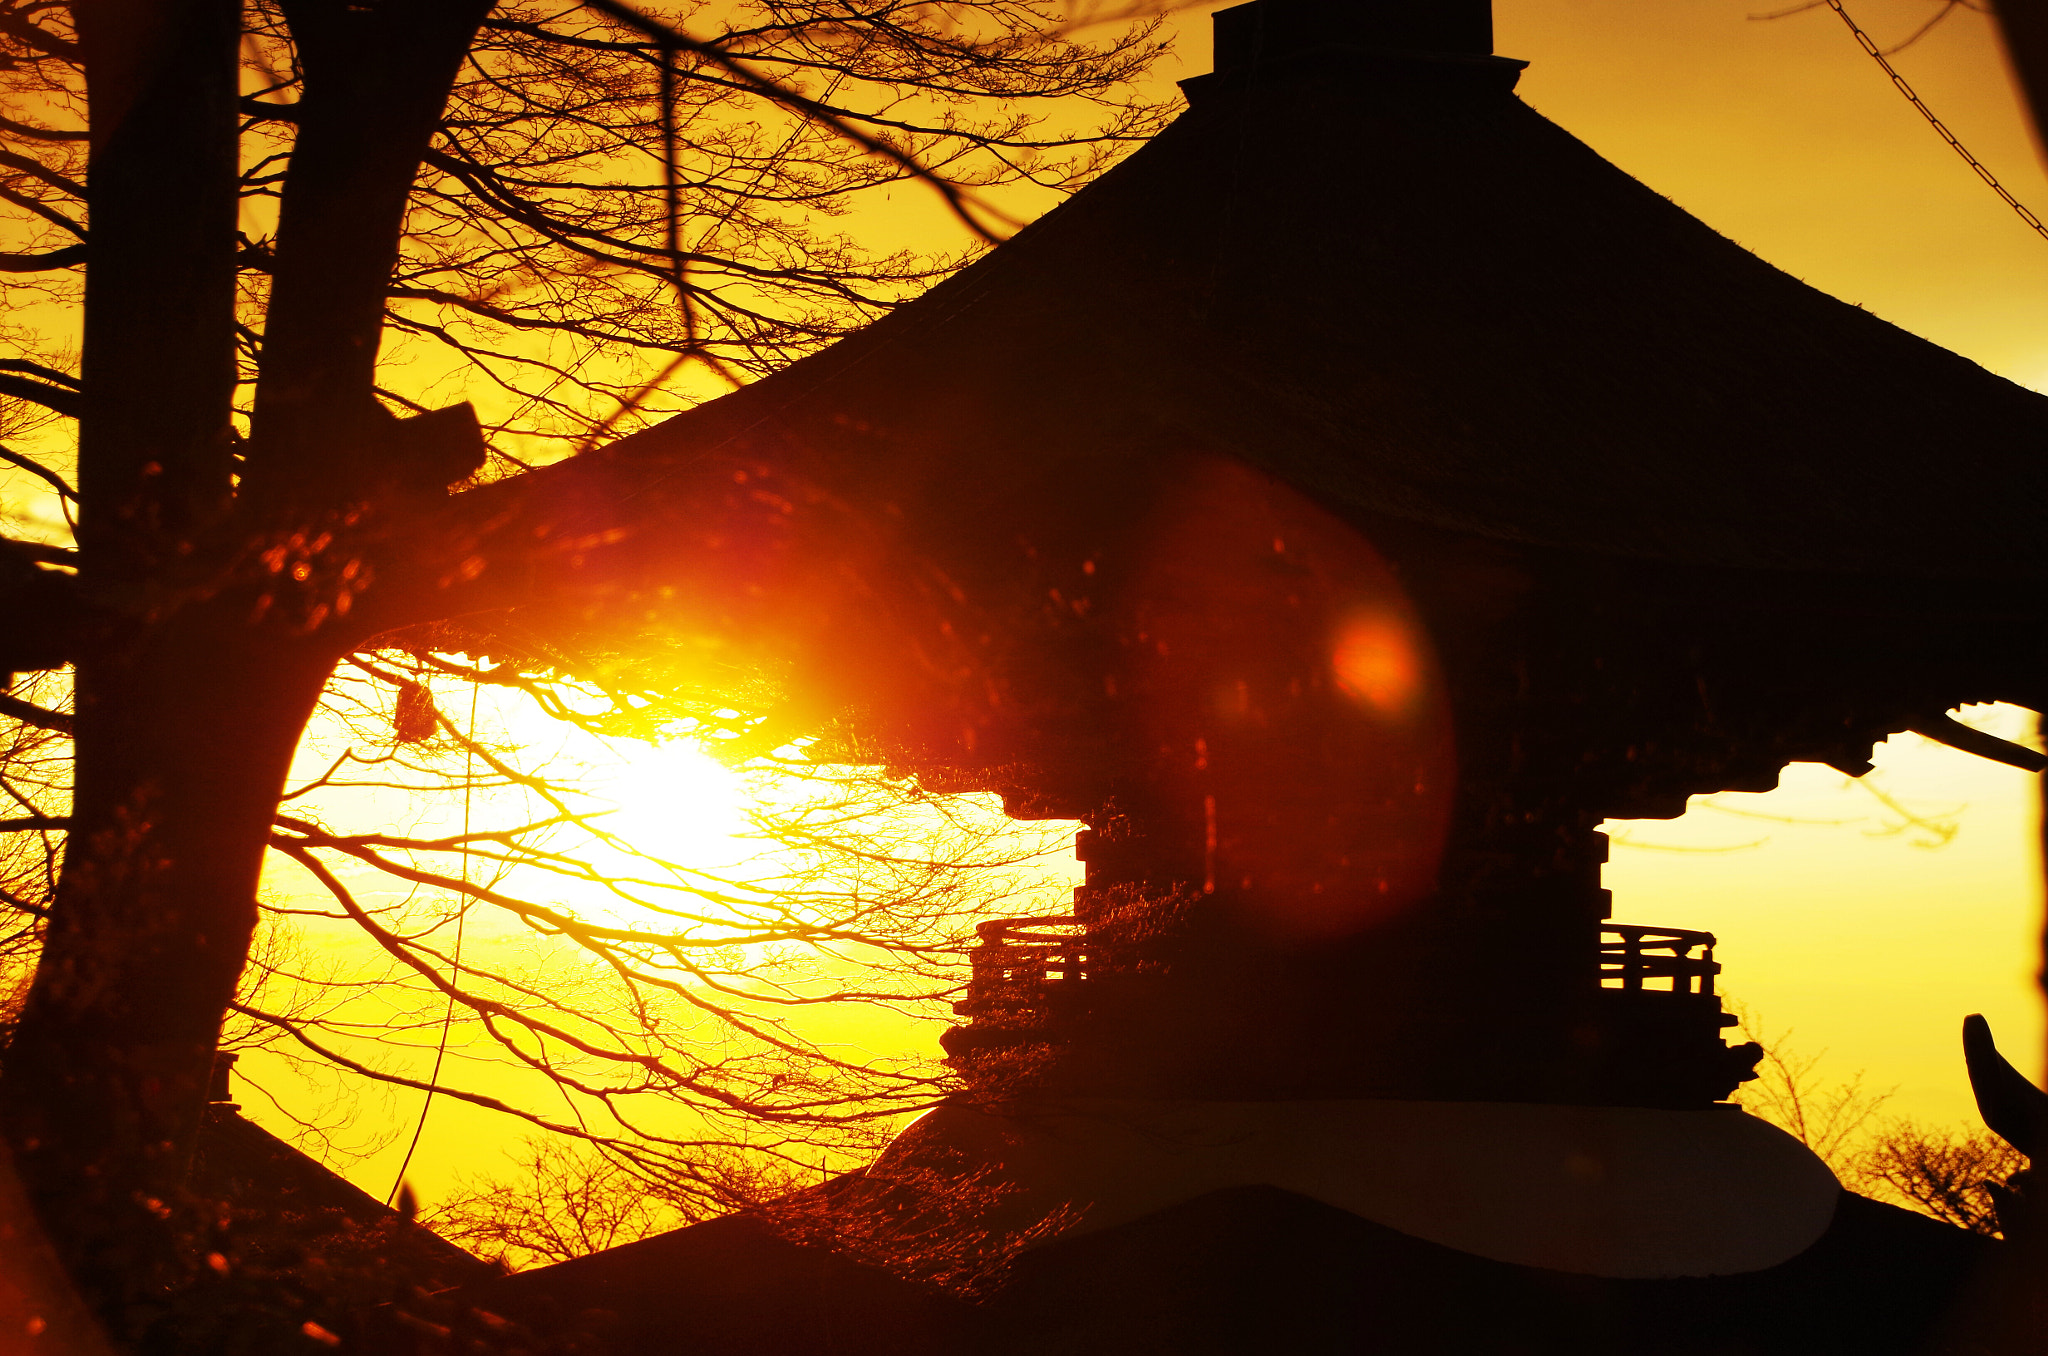 Pentax K-50 sample photo. Sunrise in the temple photography